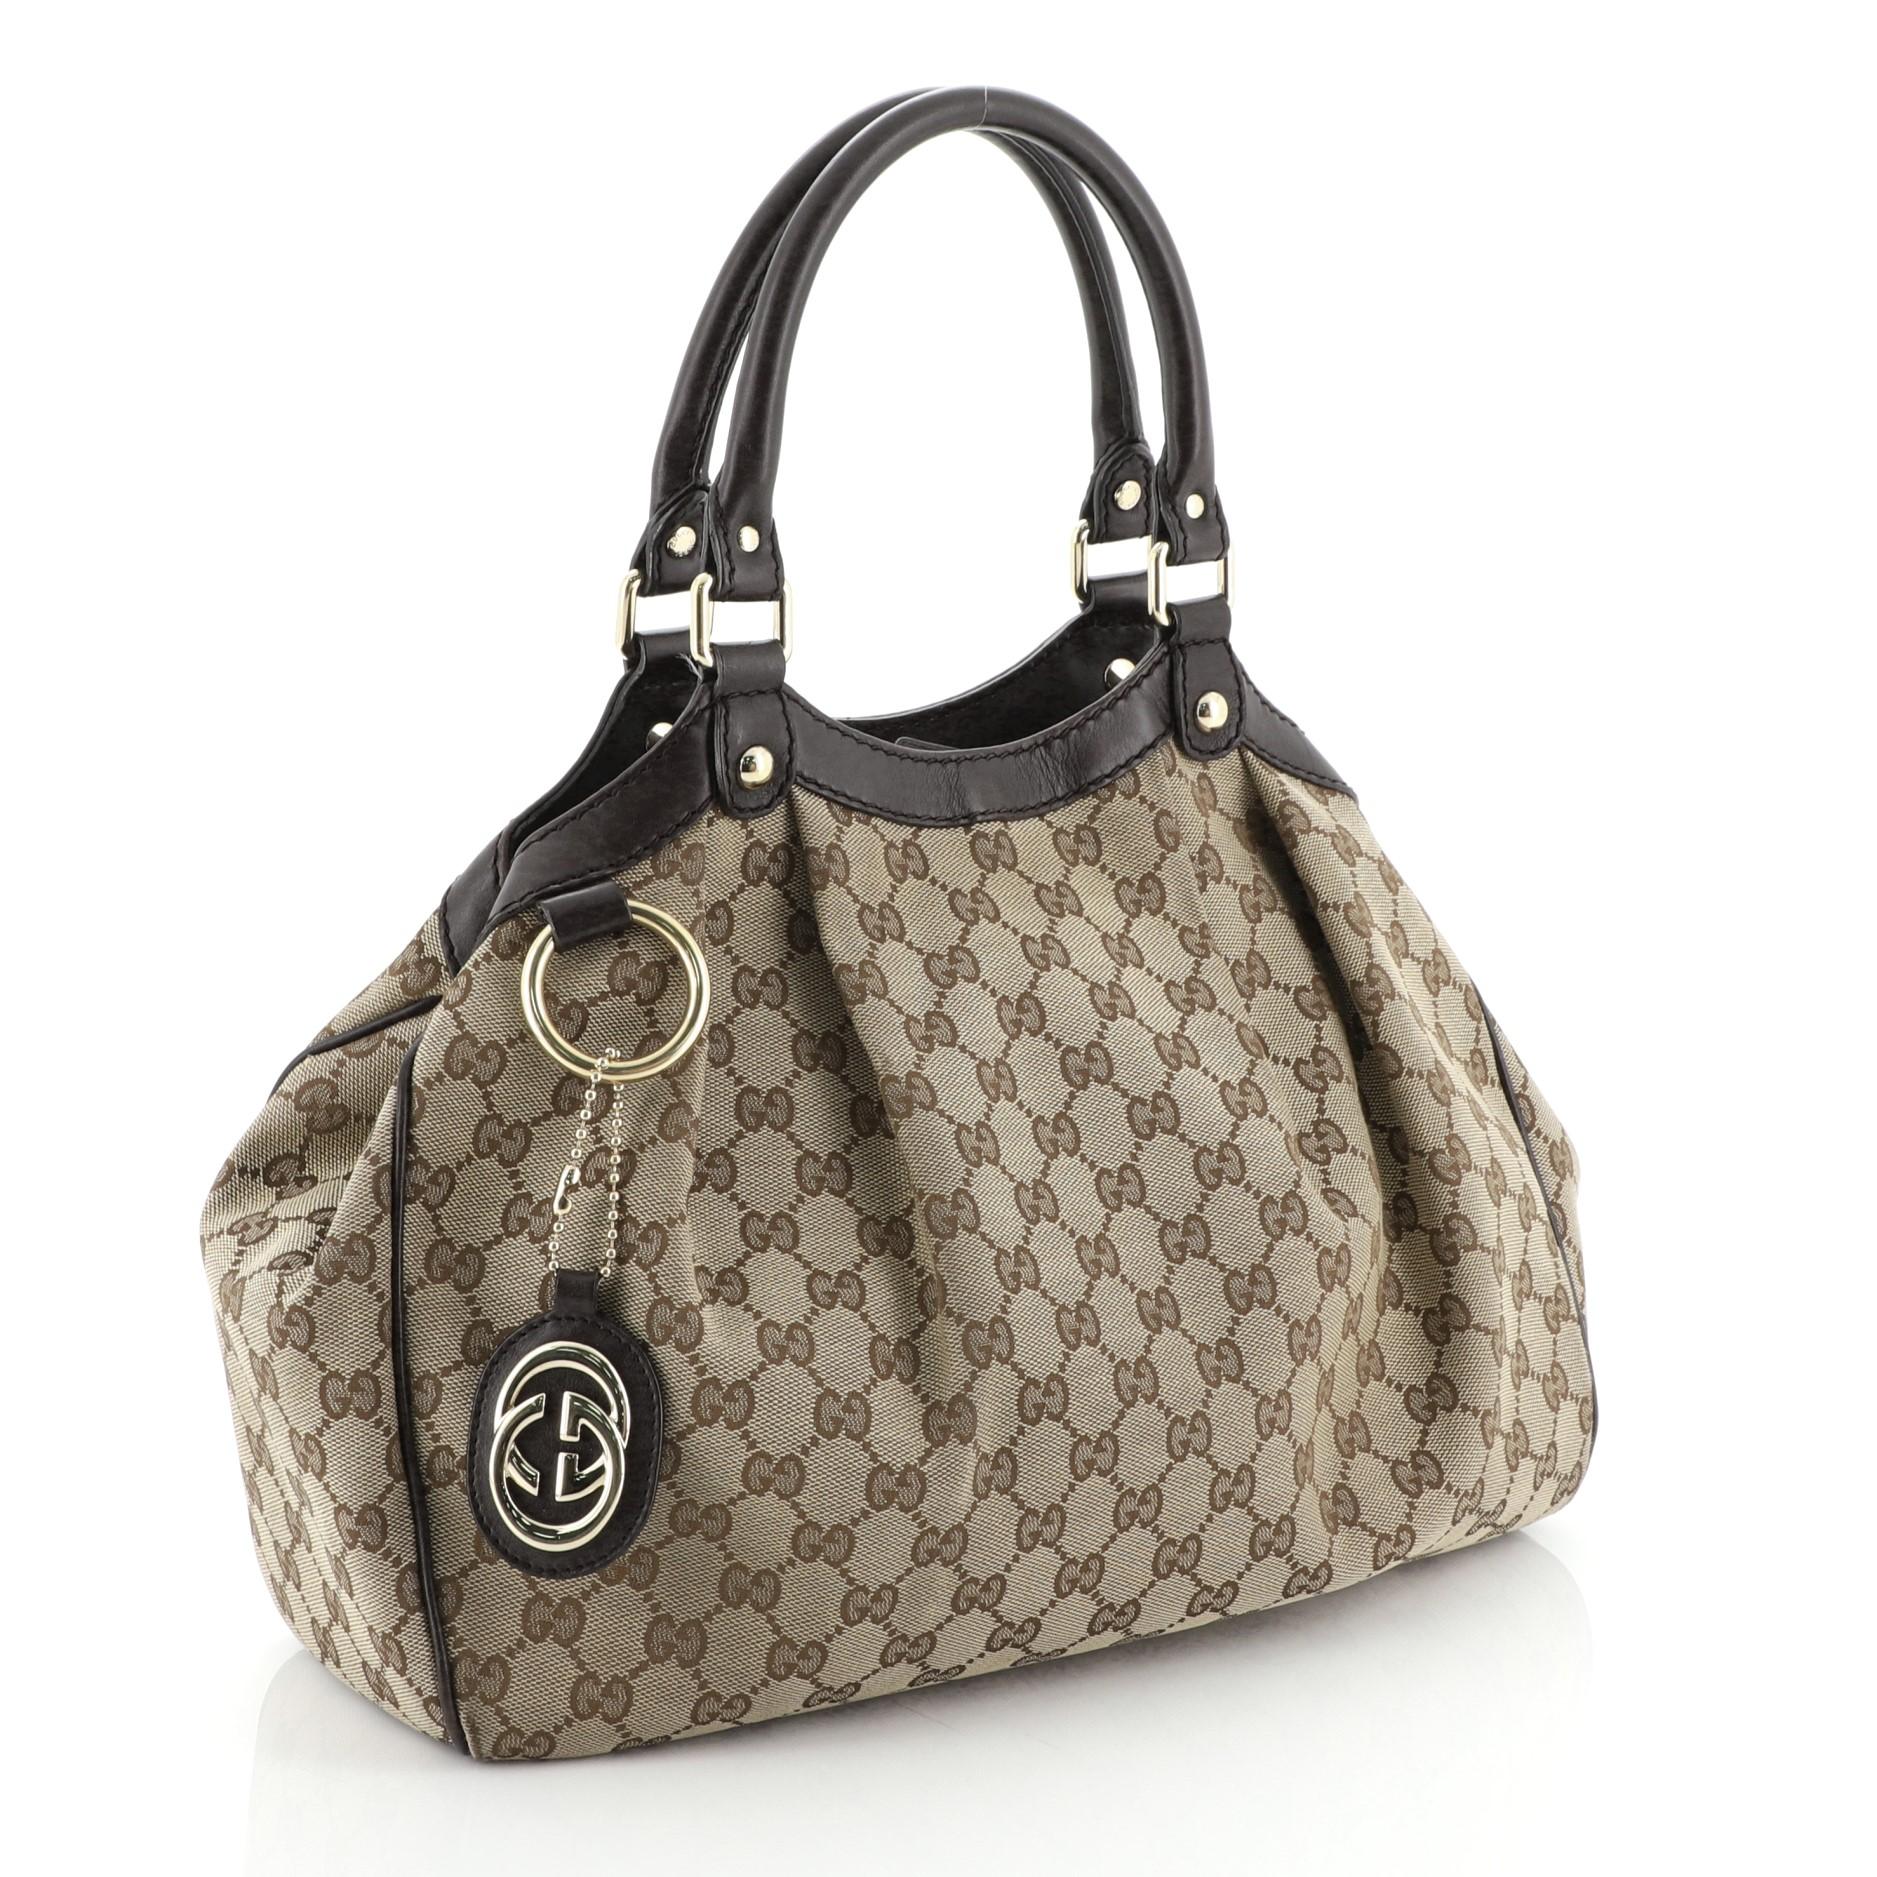 This Gucci Sukey Tote GG Canvas Medium, crafted from neutral GG monogram canvas, features dual rolled leather handles, leather trim, and gold-tone hardware. Its magnetic snap closure opens to a brown fabric interior with side zip pocket. 

Estimated